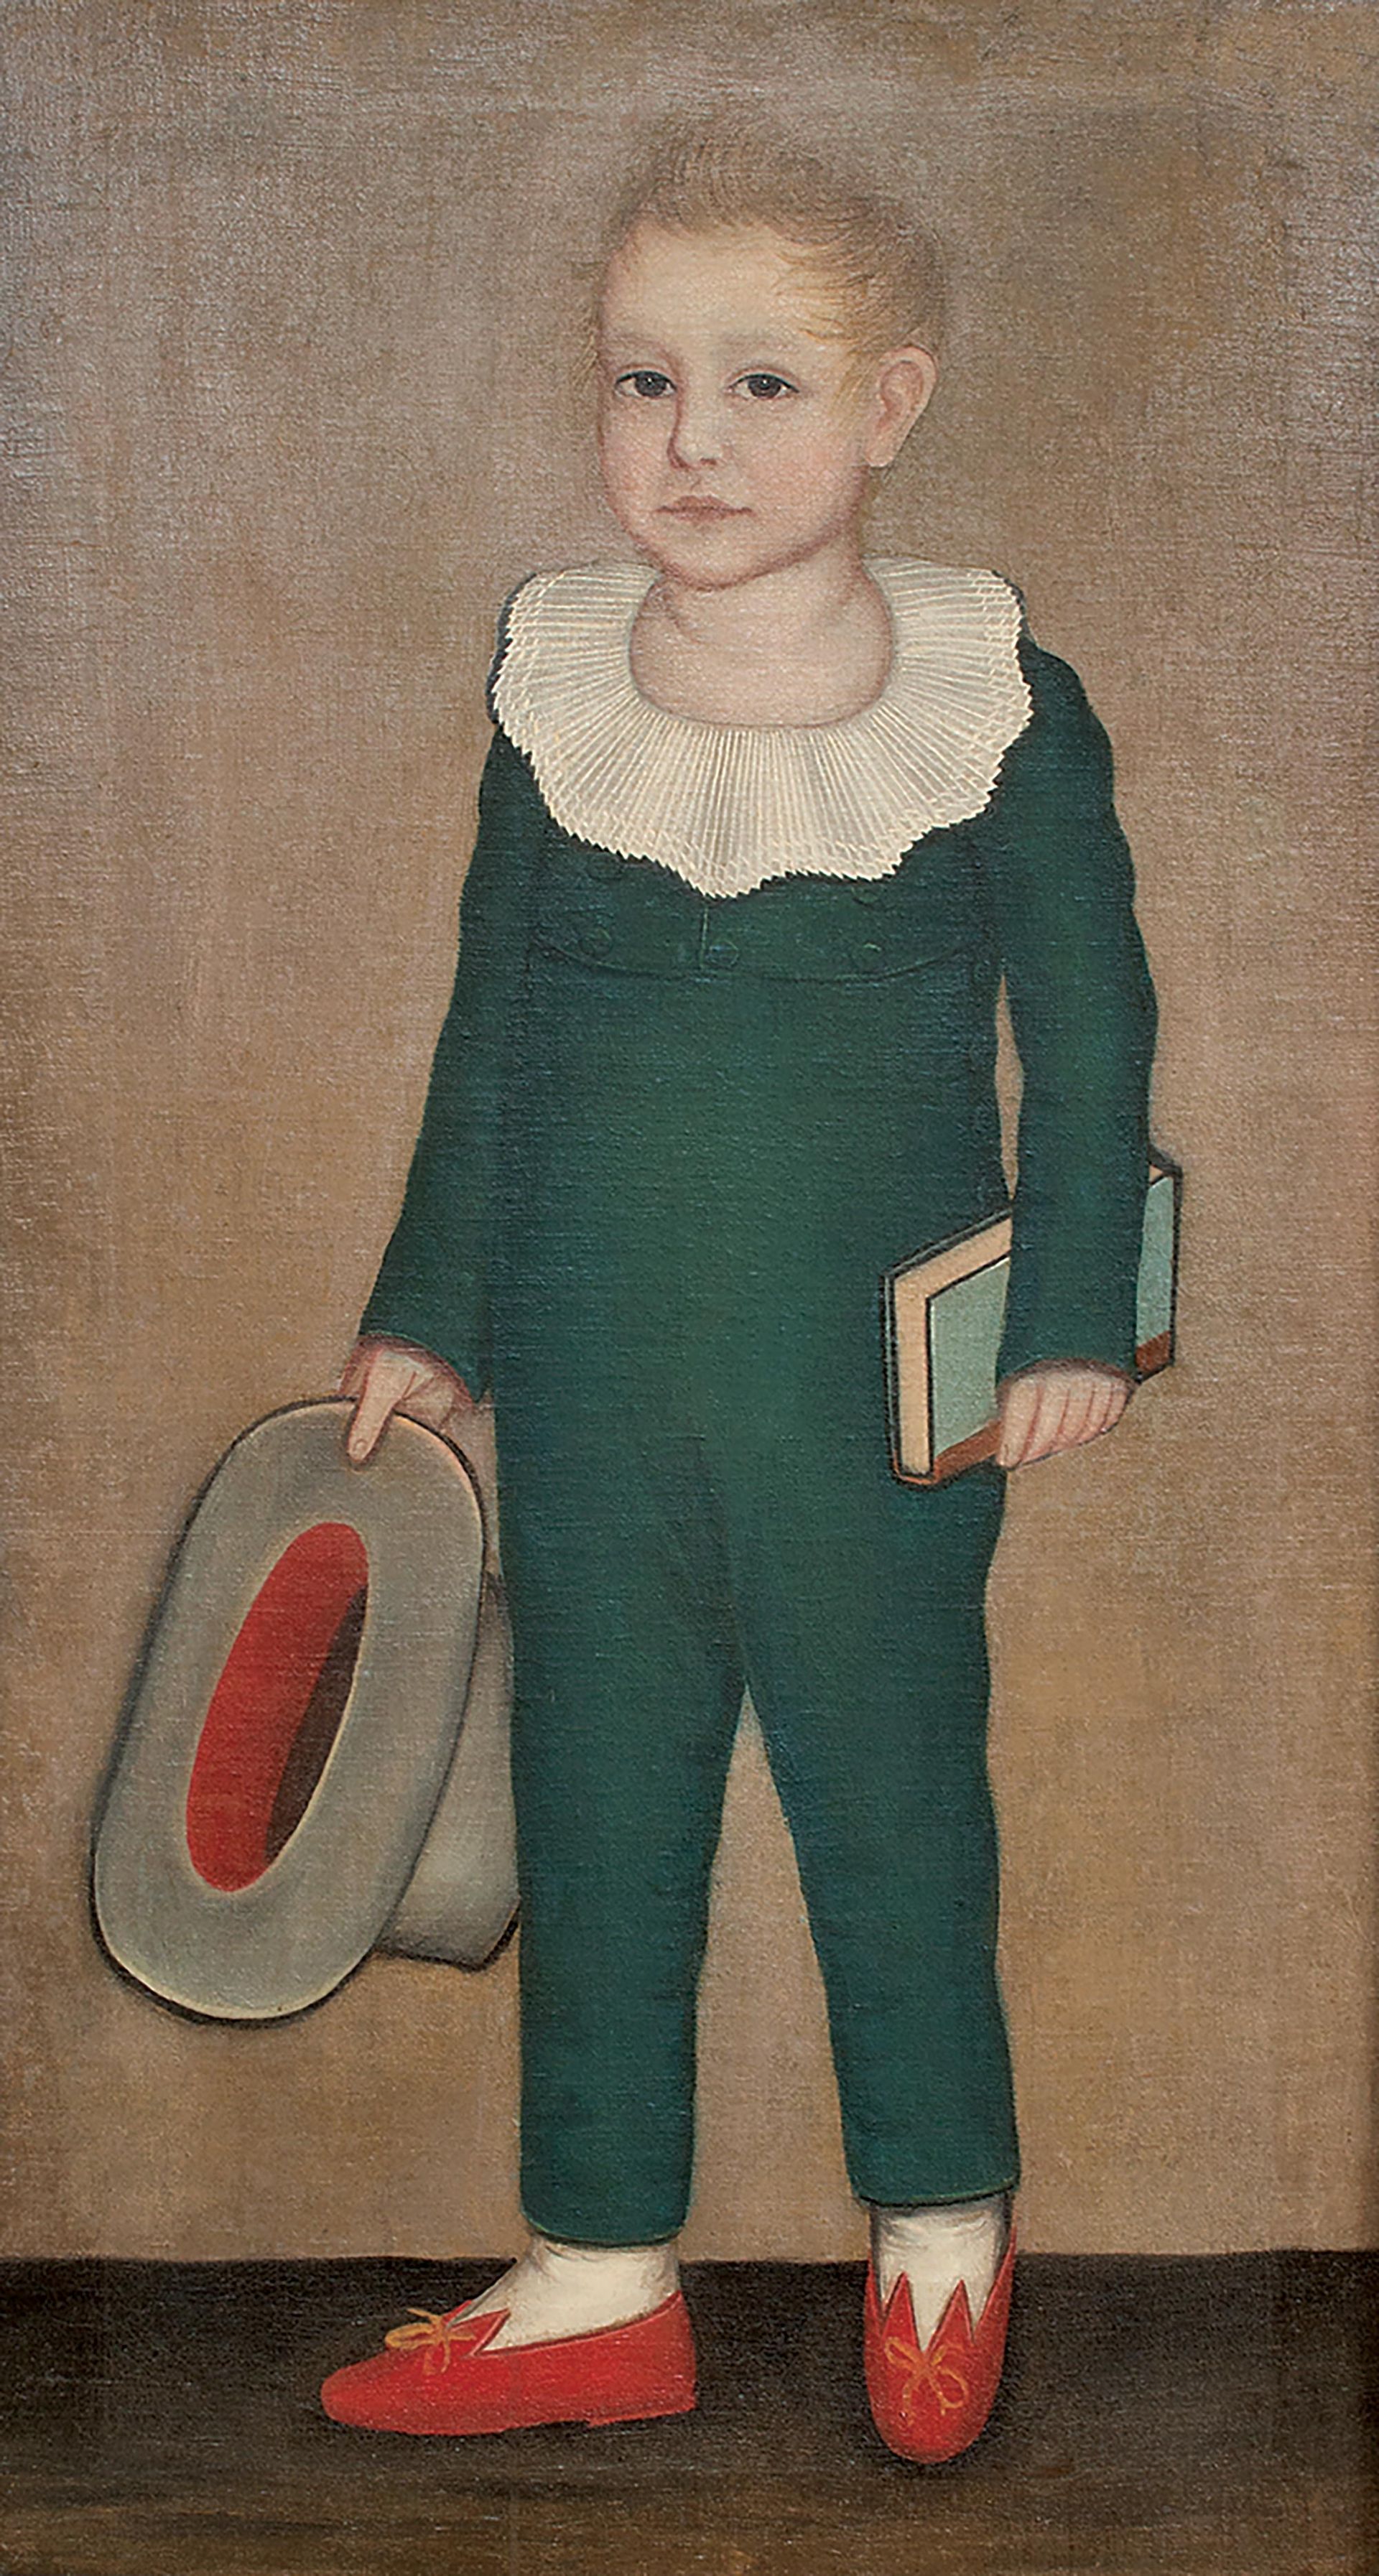 Ammi Phillips, Portrait of Frederick A. Gale (around 1815) Photo by J. David Bohl, courtesy the American Folk Art Museum, New York